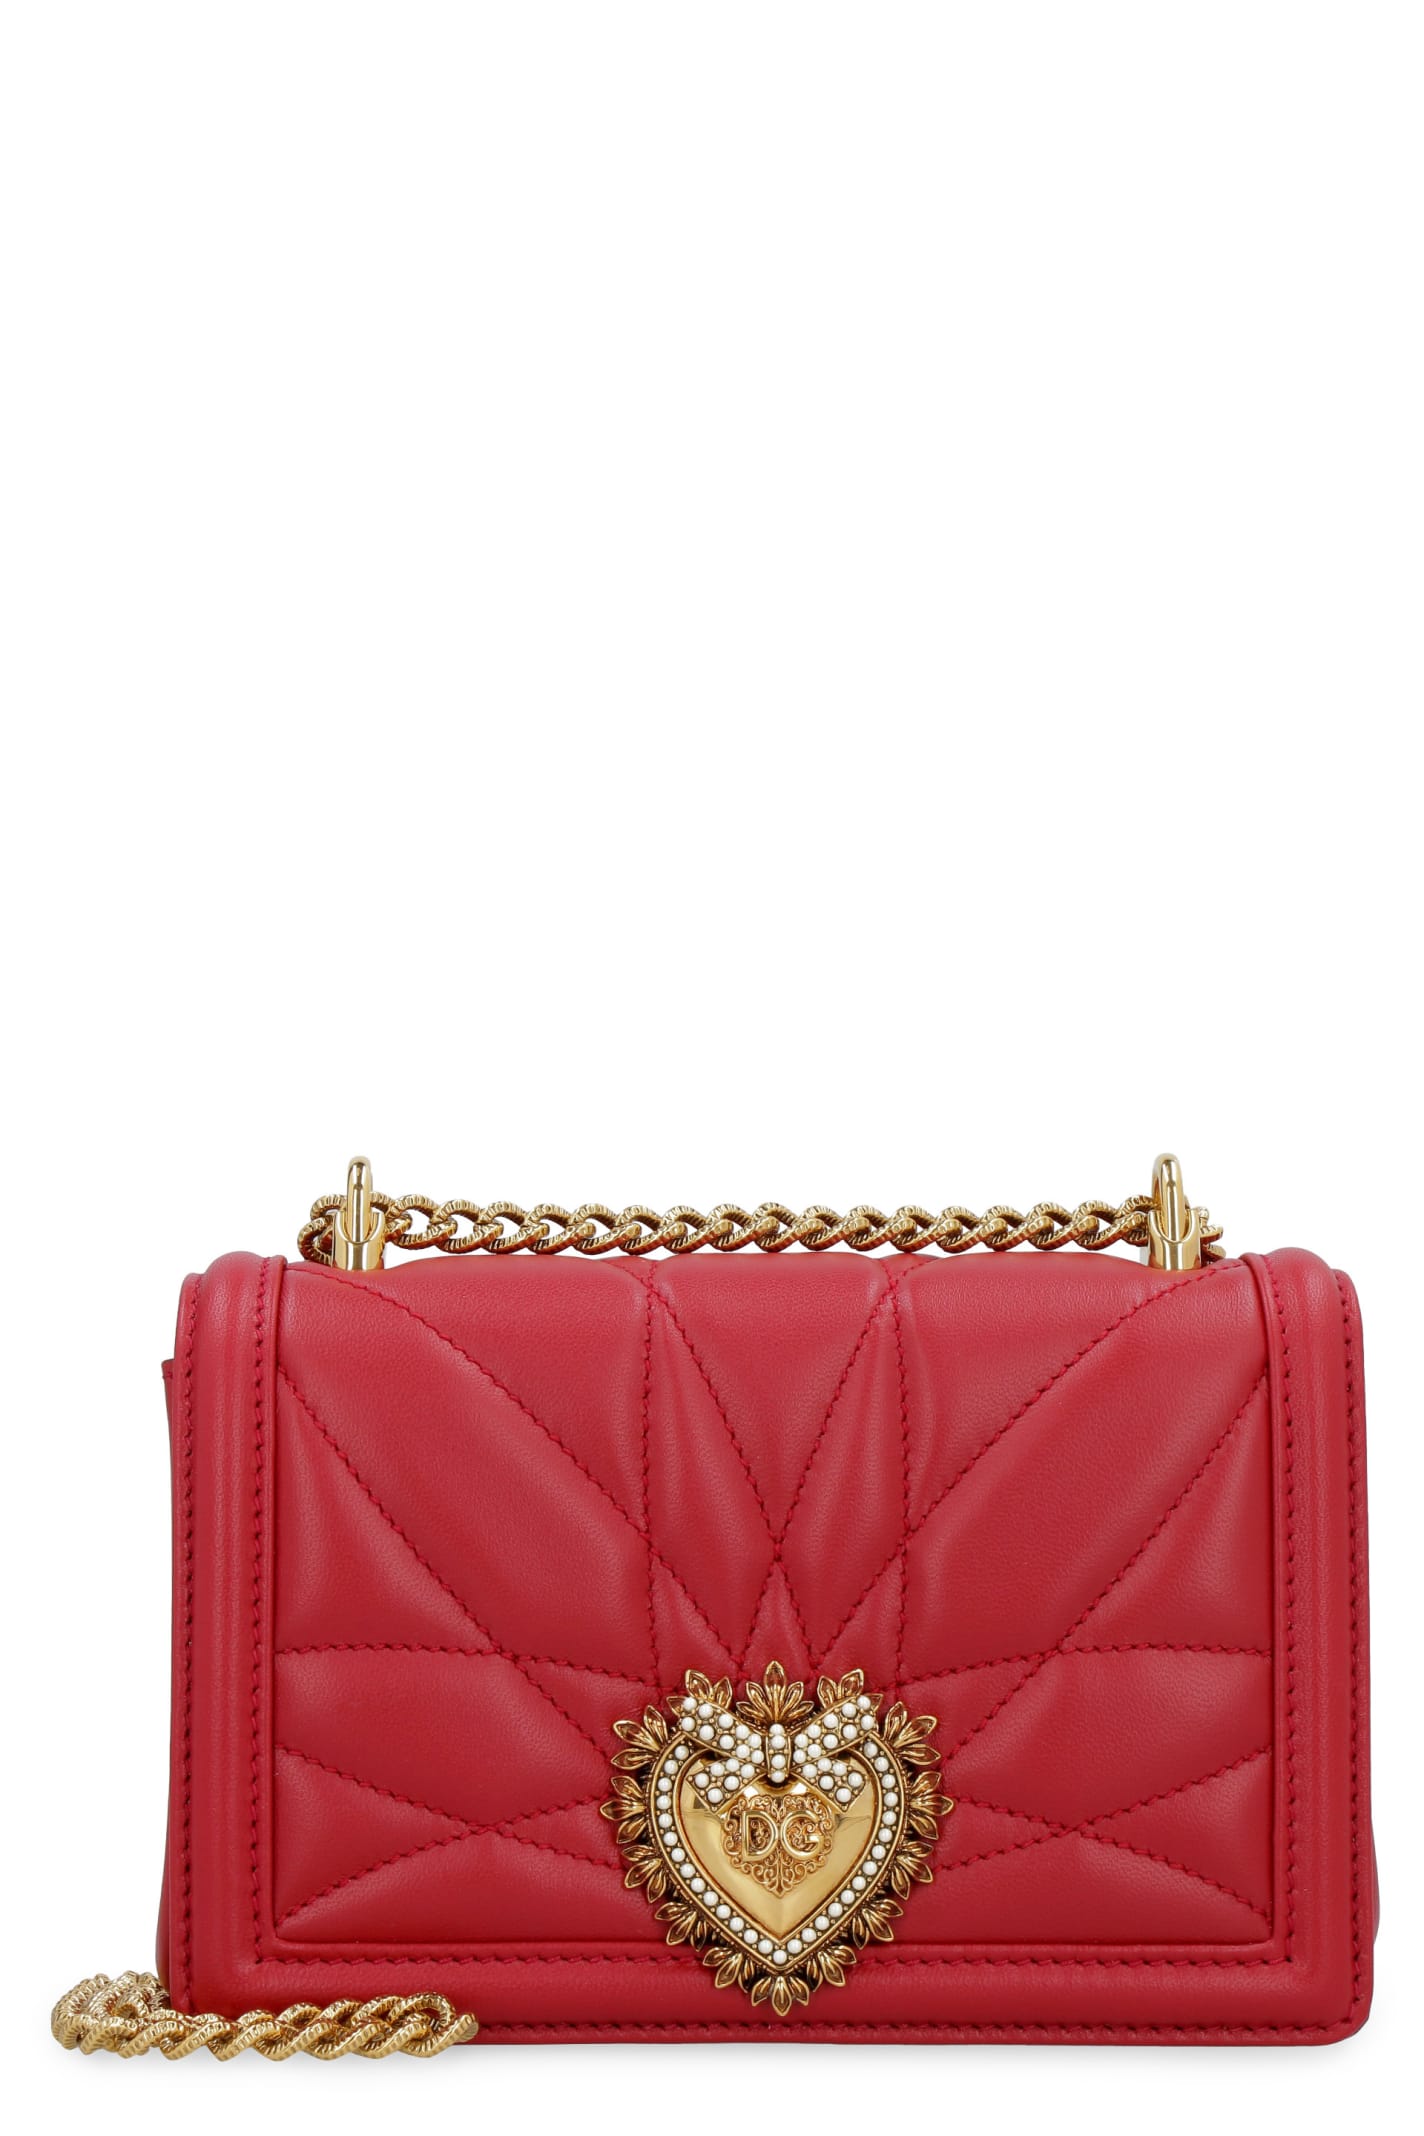 Dolce & Gabbana Devotion Quilted Leather Mini-bag